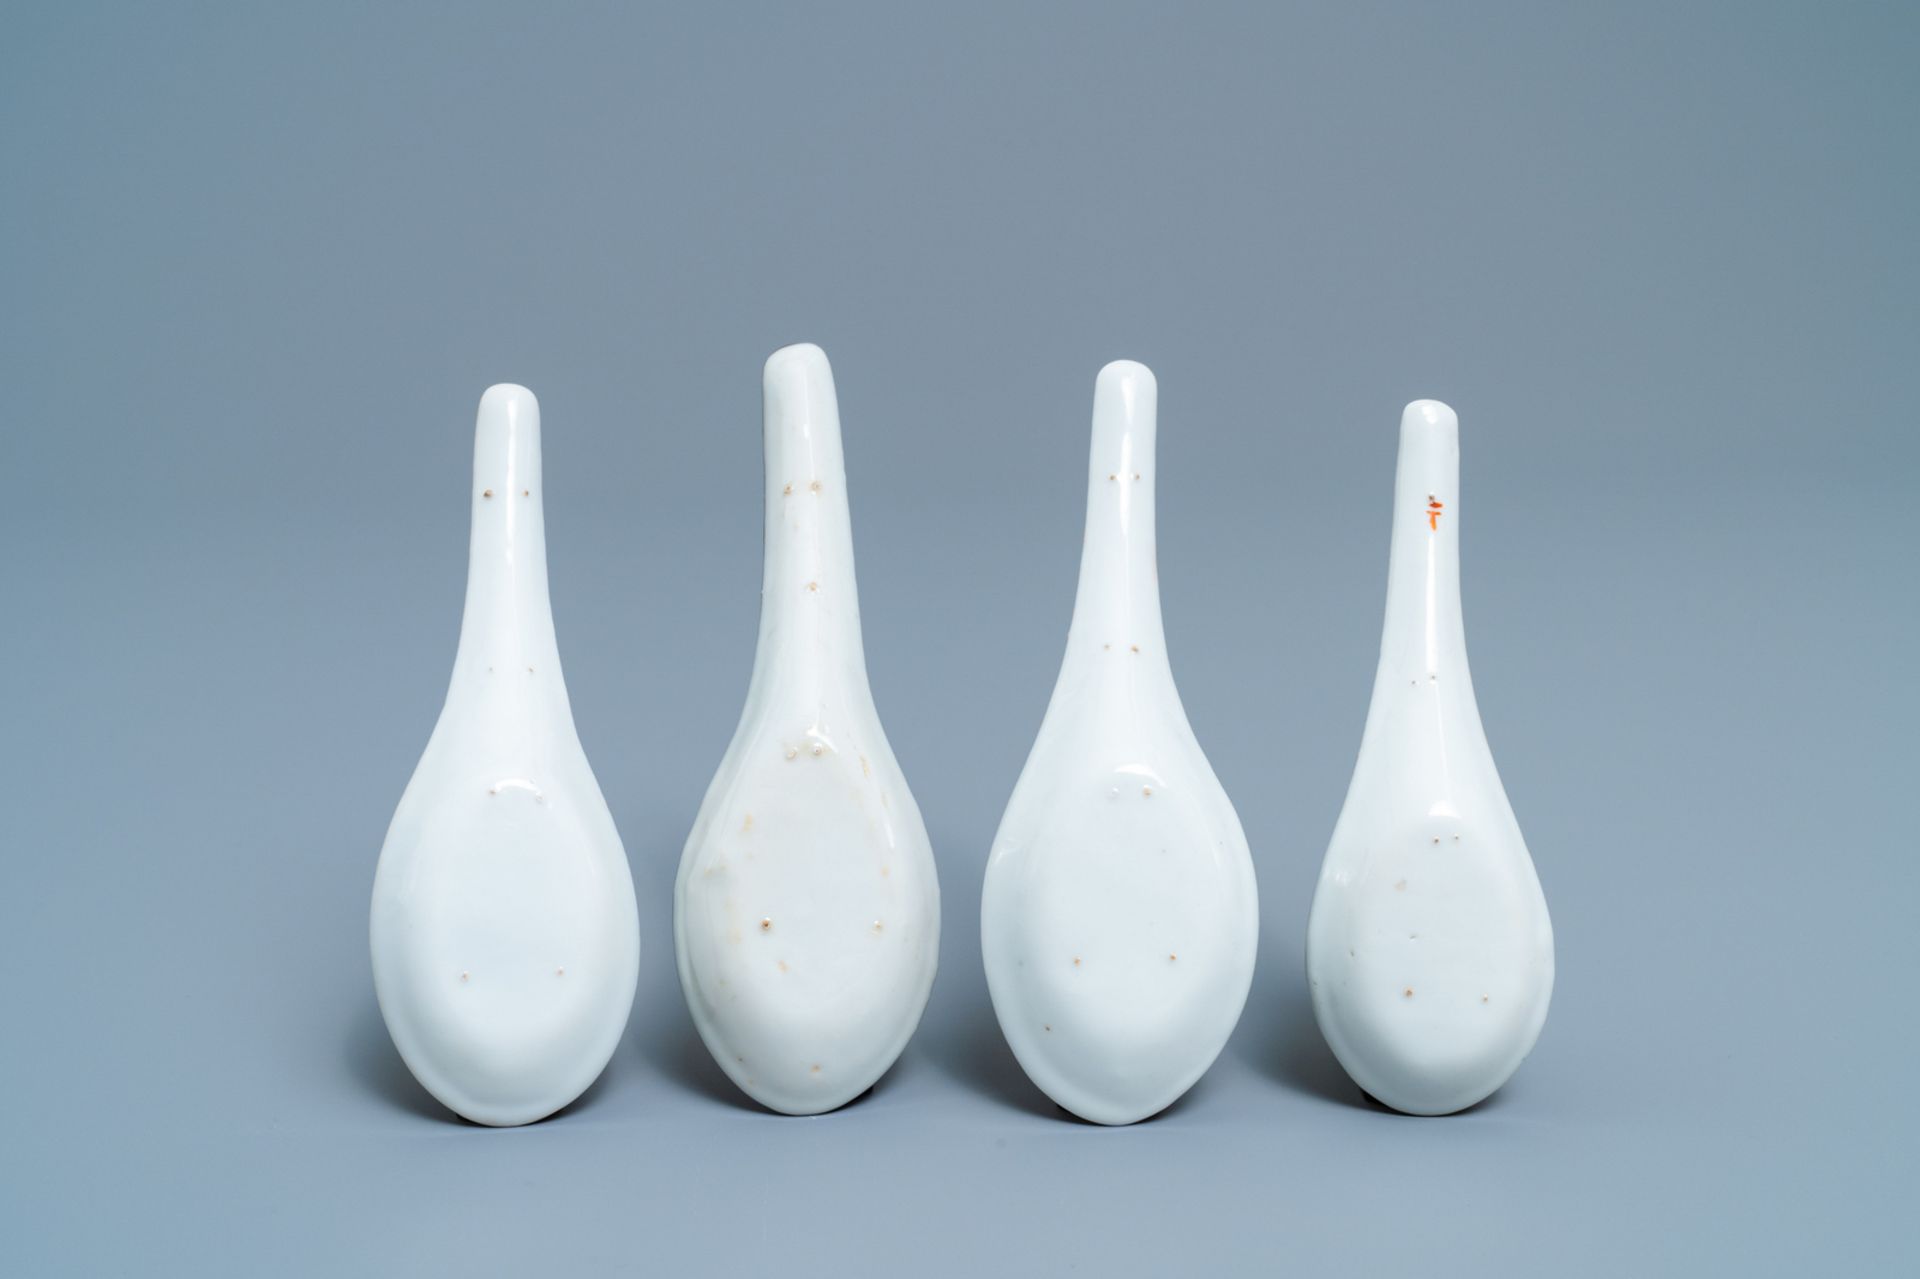 Four Chinese Thai market Bencharong spoons, 19th C. - Image 3 of 5